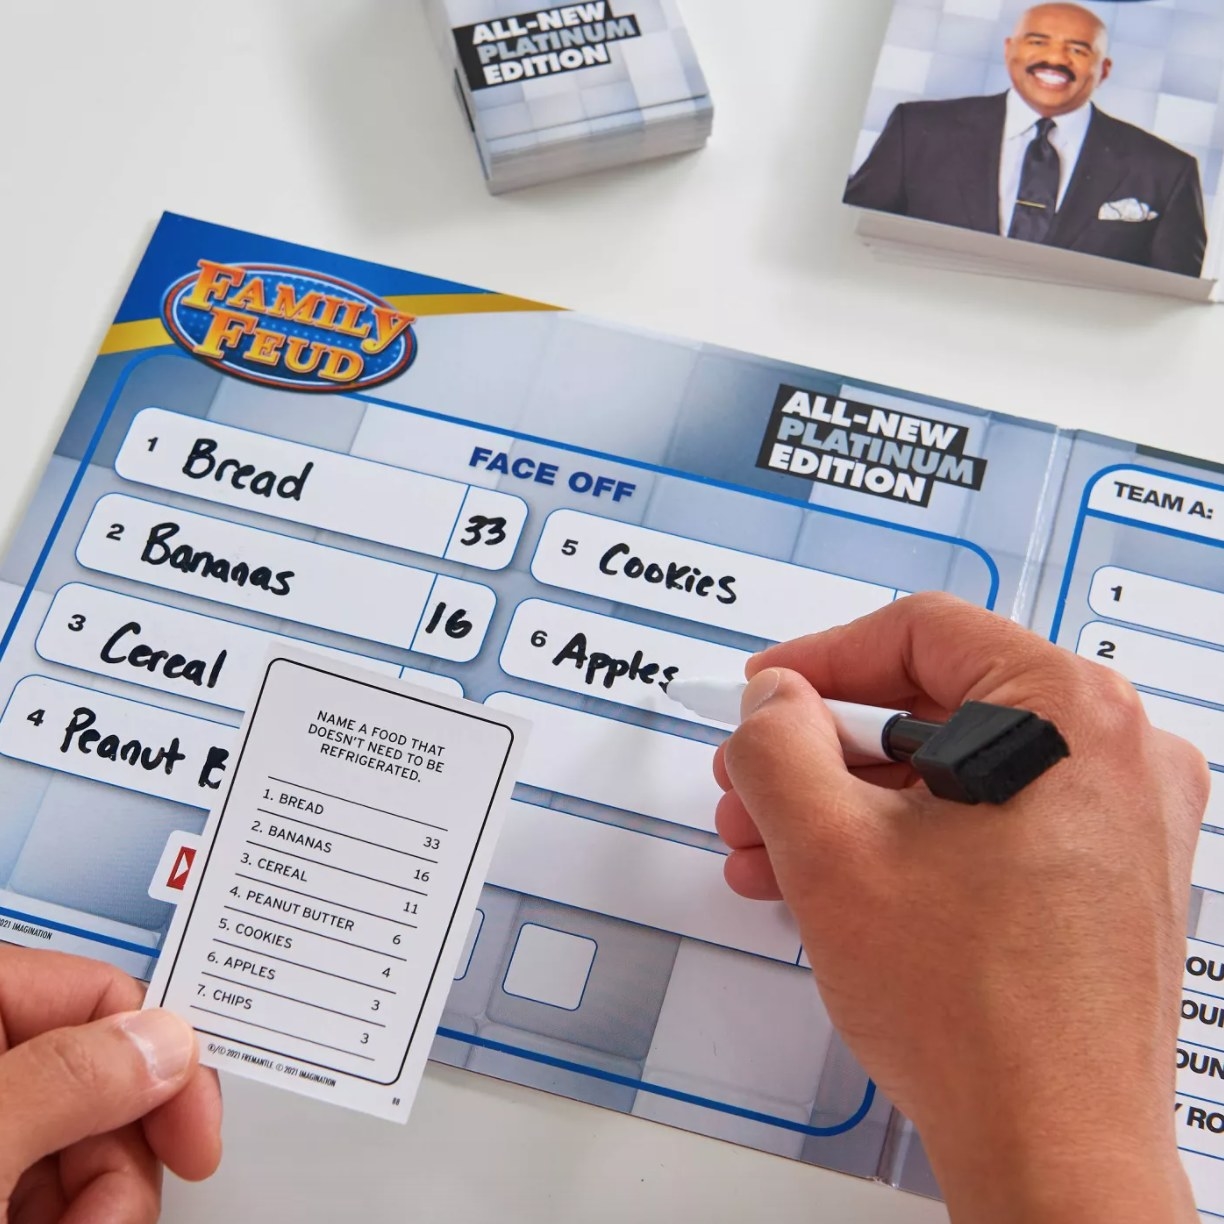 Family Feud dry erase board with game answers